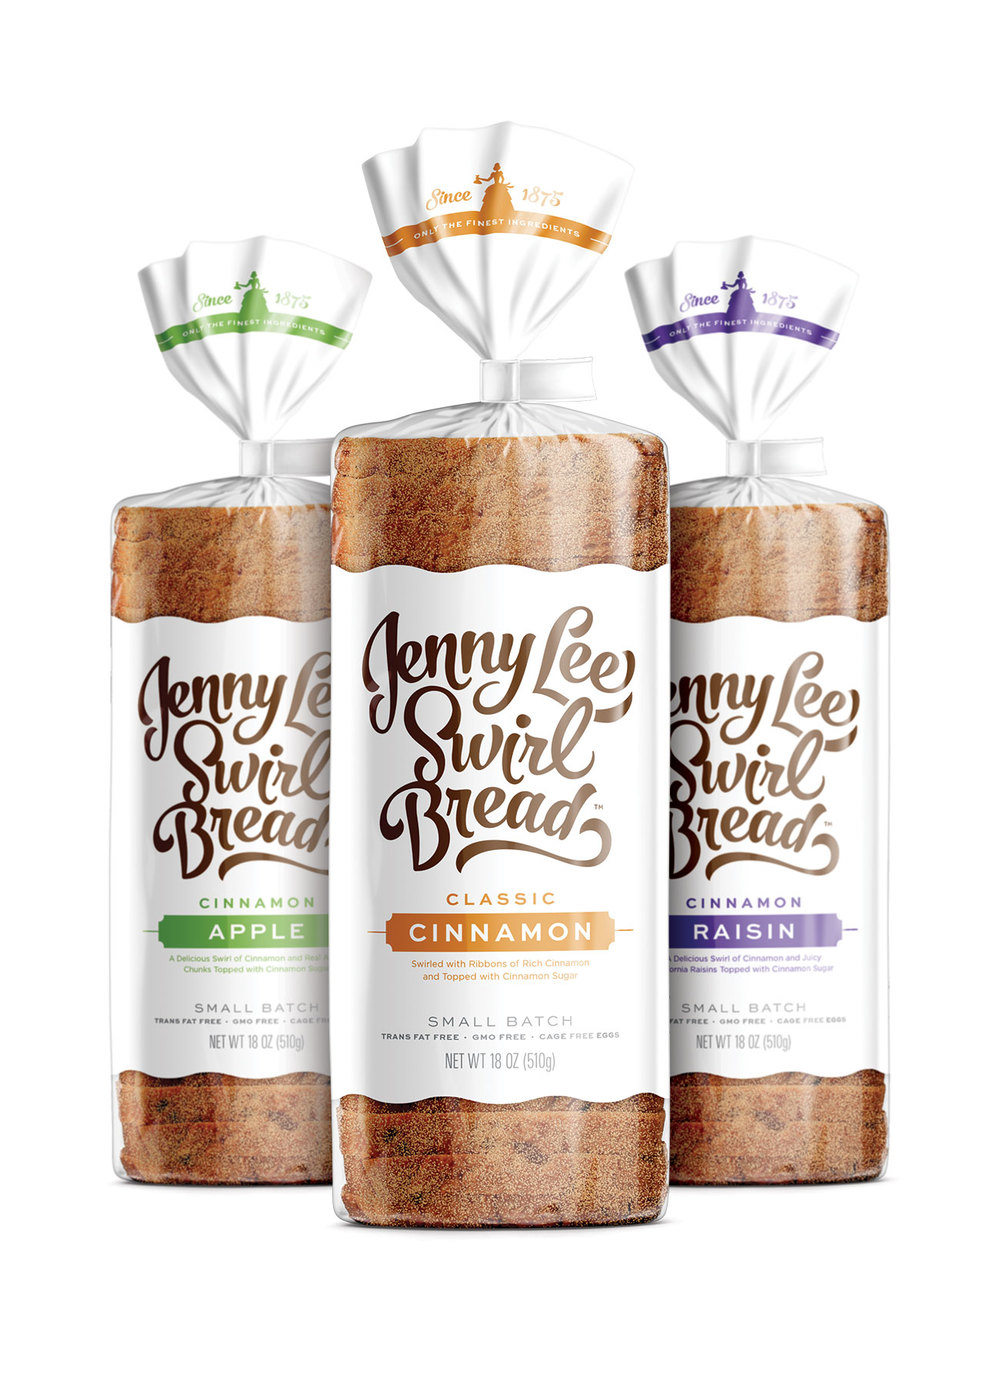 Jenny Lee Swirl Bread — Hampton Hargreaves / Design for Print, Packaging  and Interactive